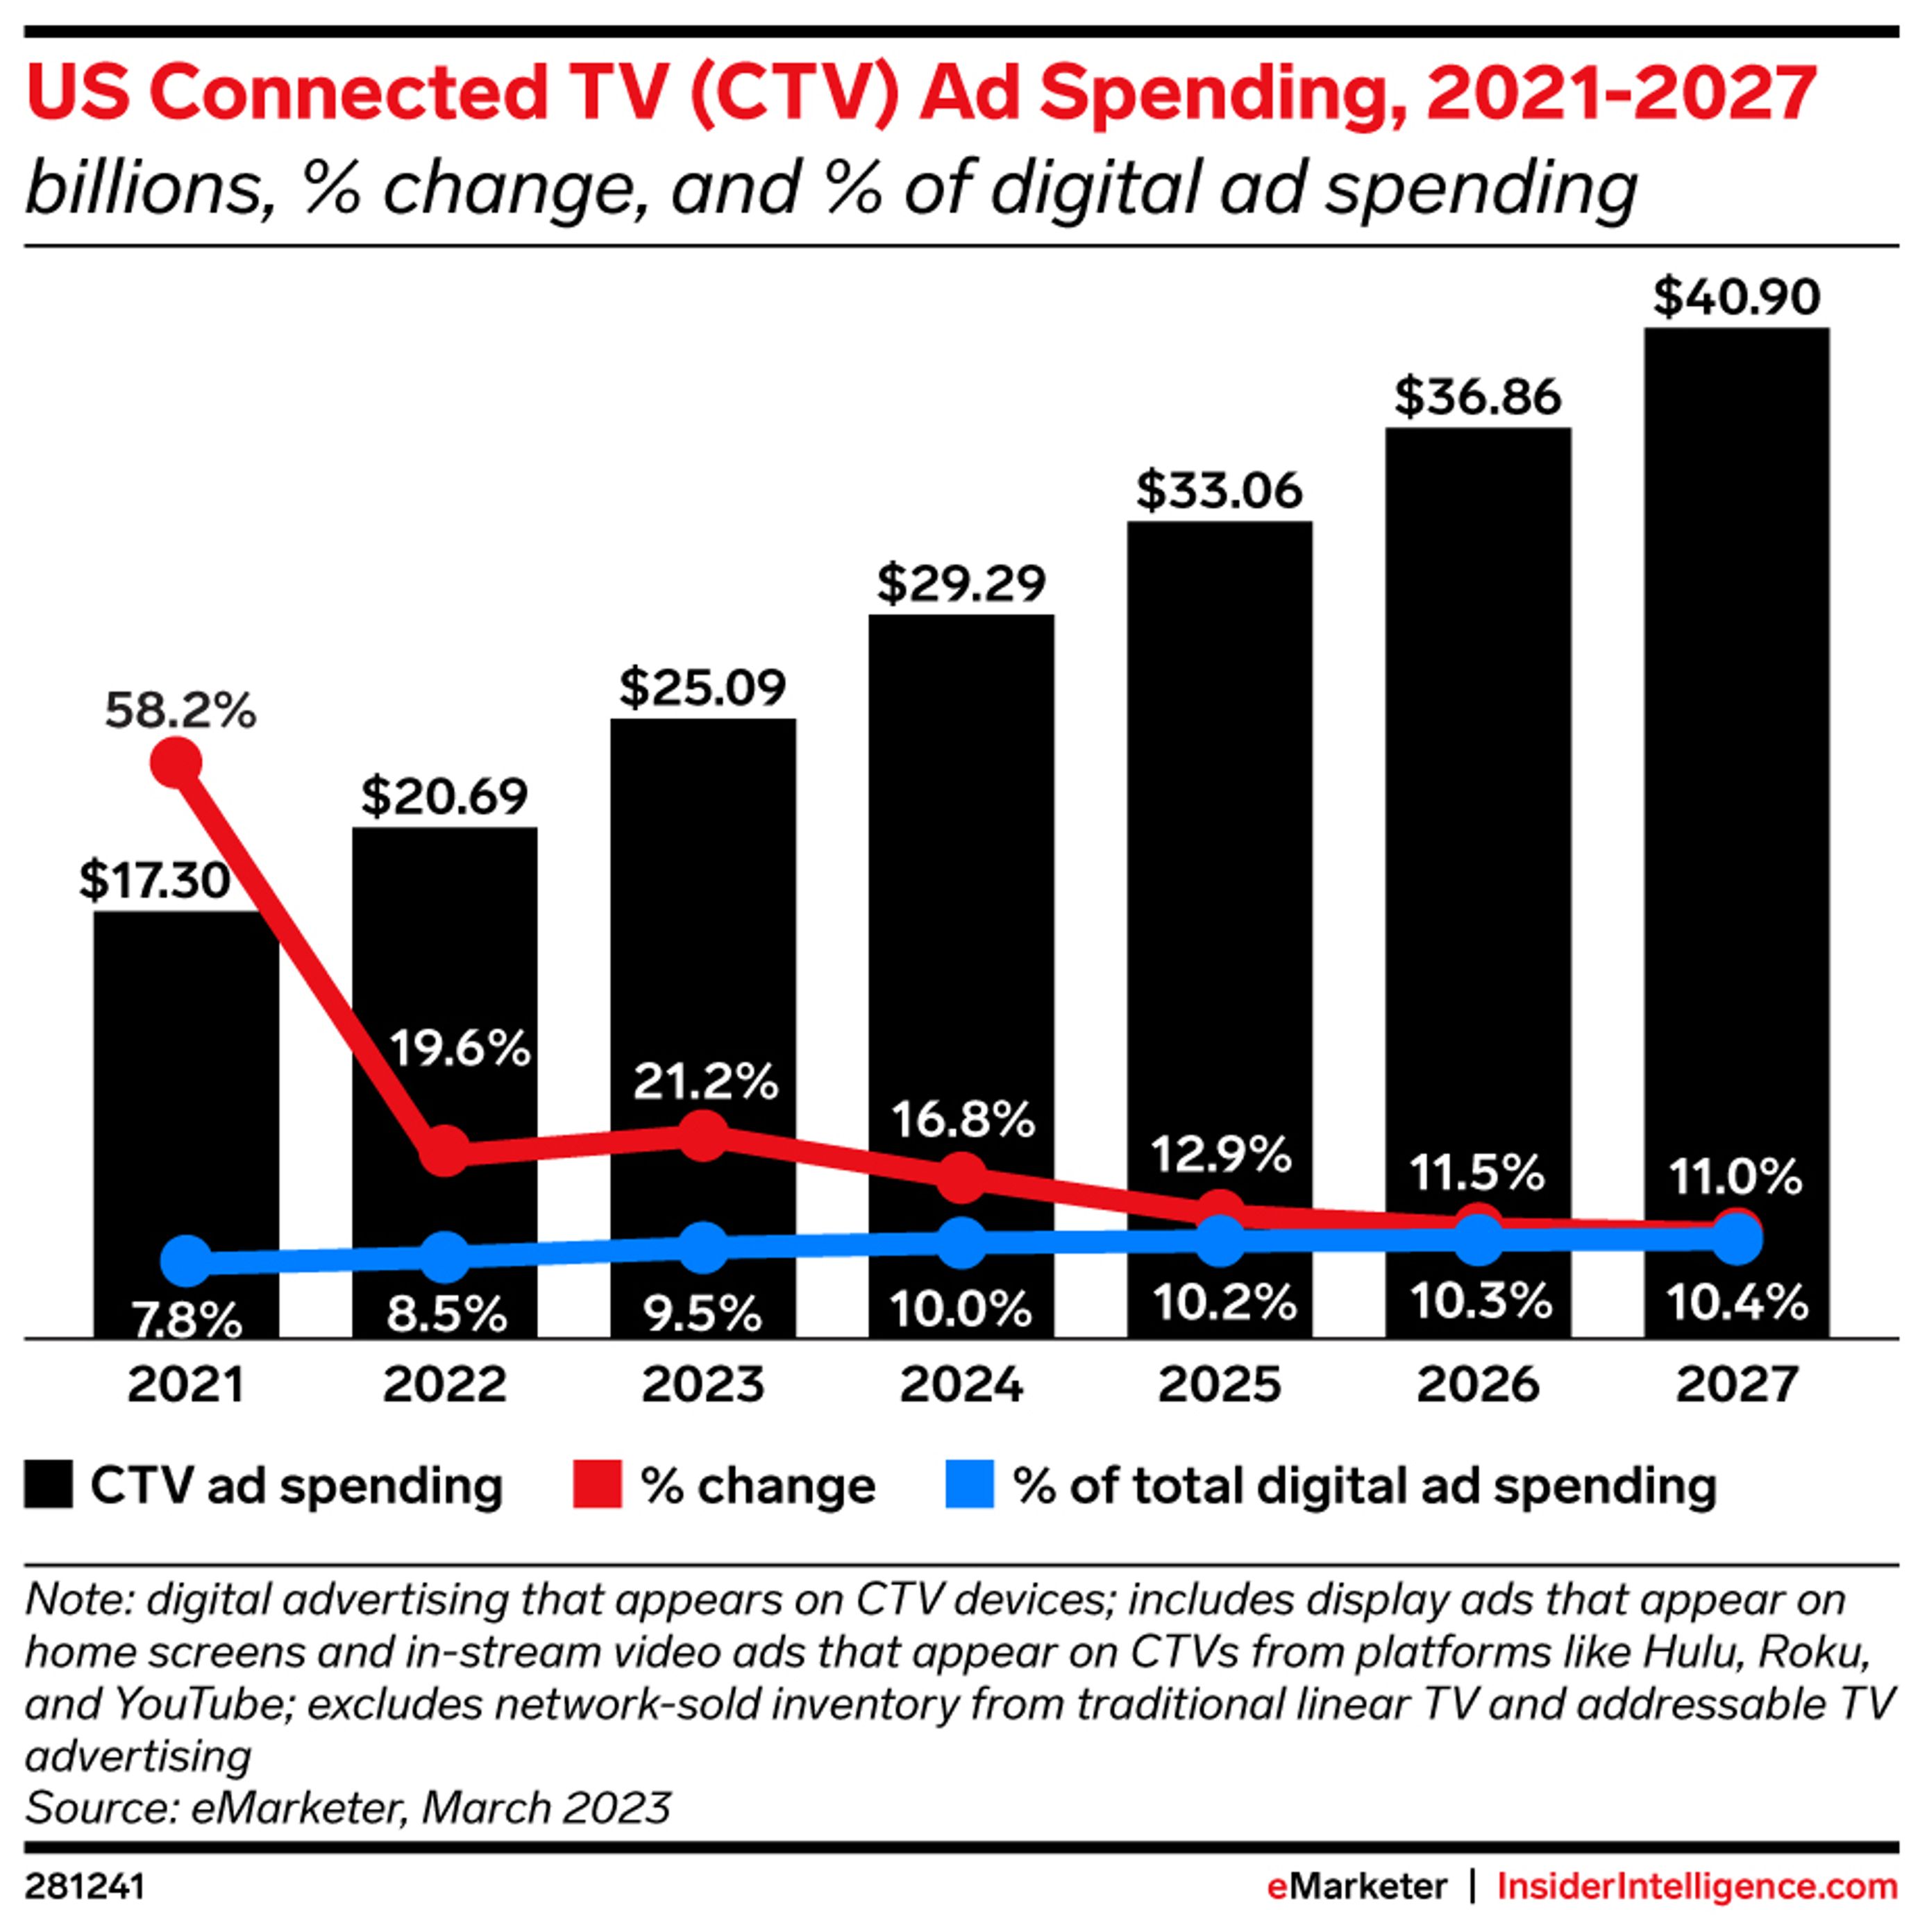 US Connected TV Ad Spending, 2021 - 2027